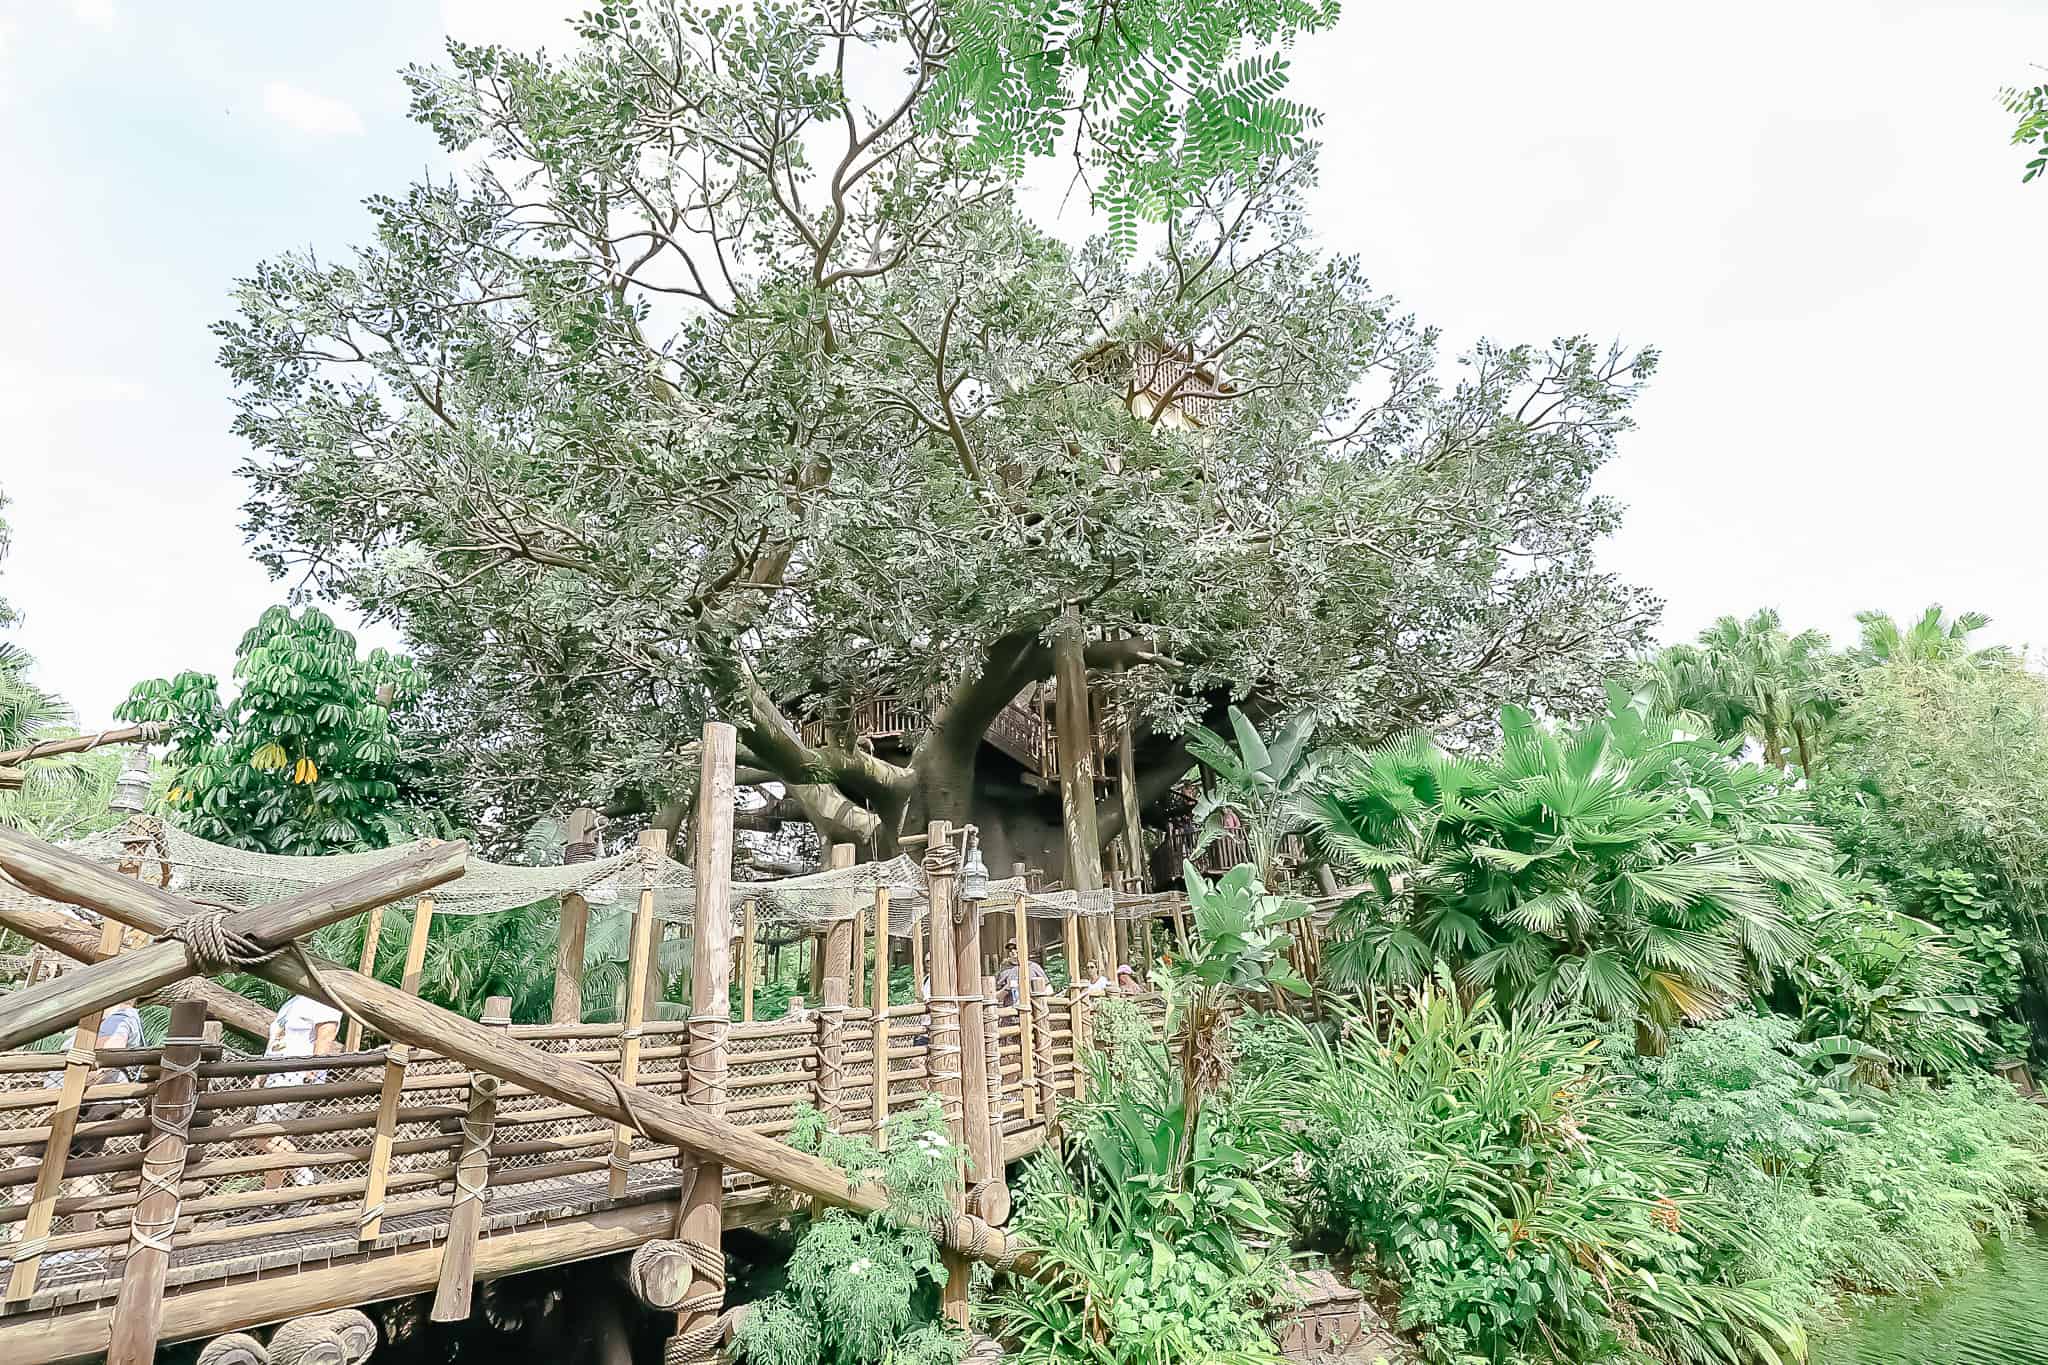 View of the treehouse from Adventureland